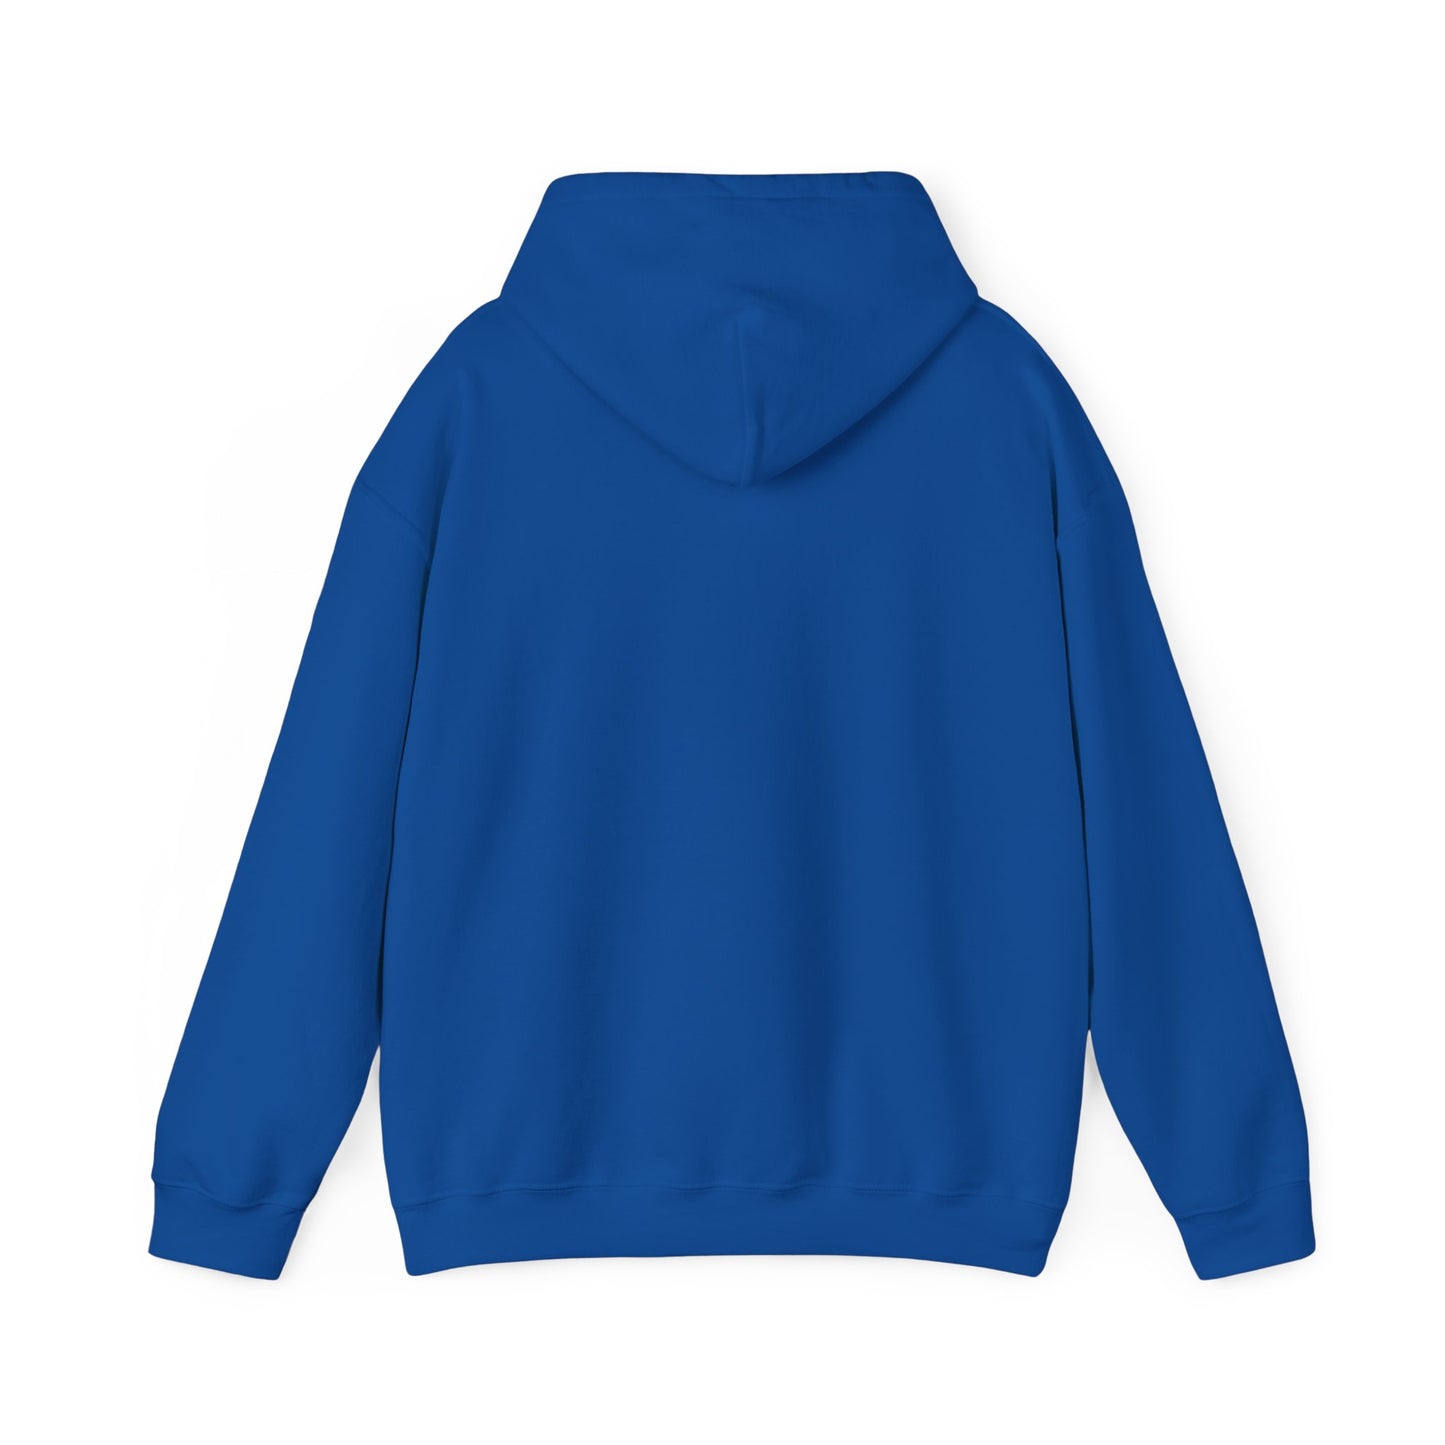 C.P.A. - Hoodies with Credentials for Financial Advisors